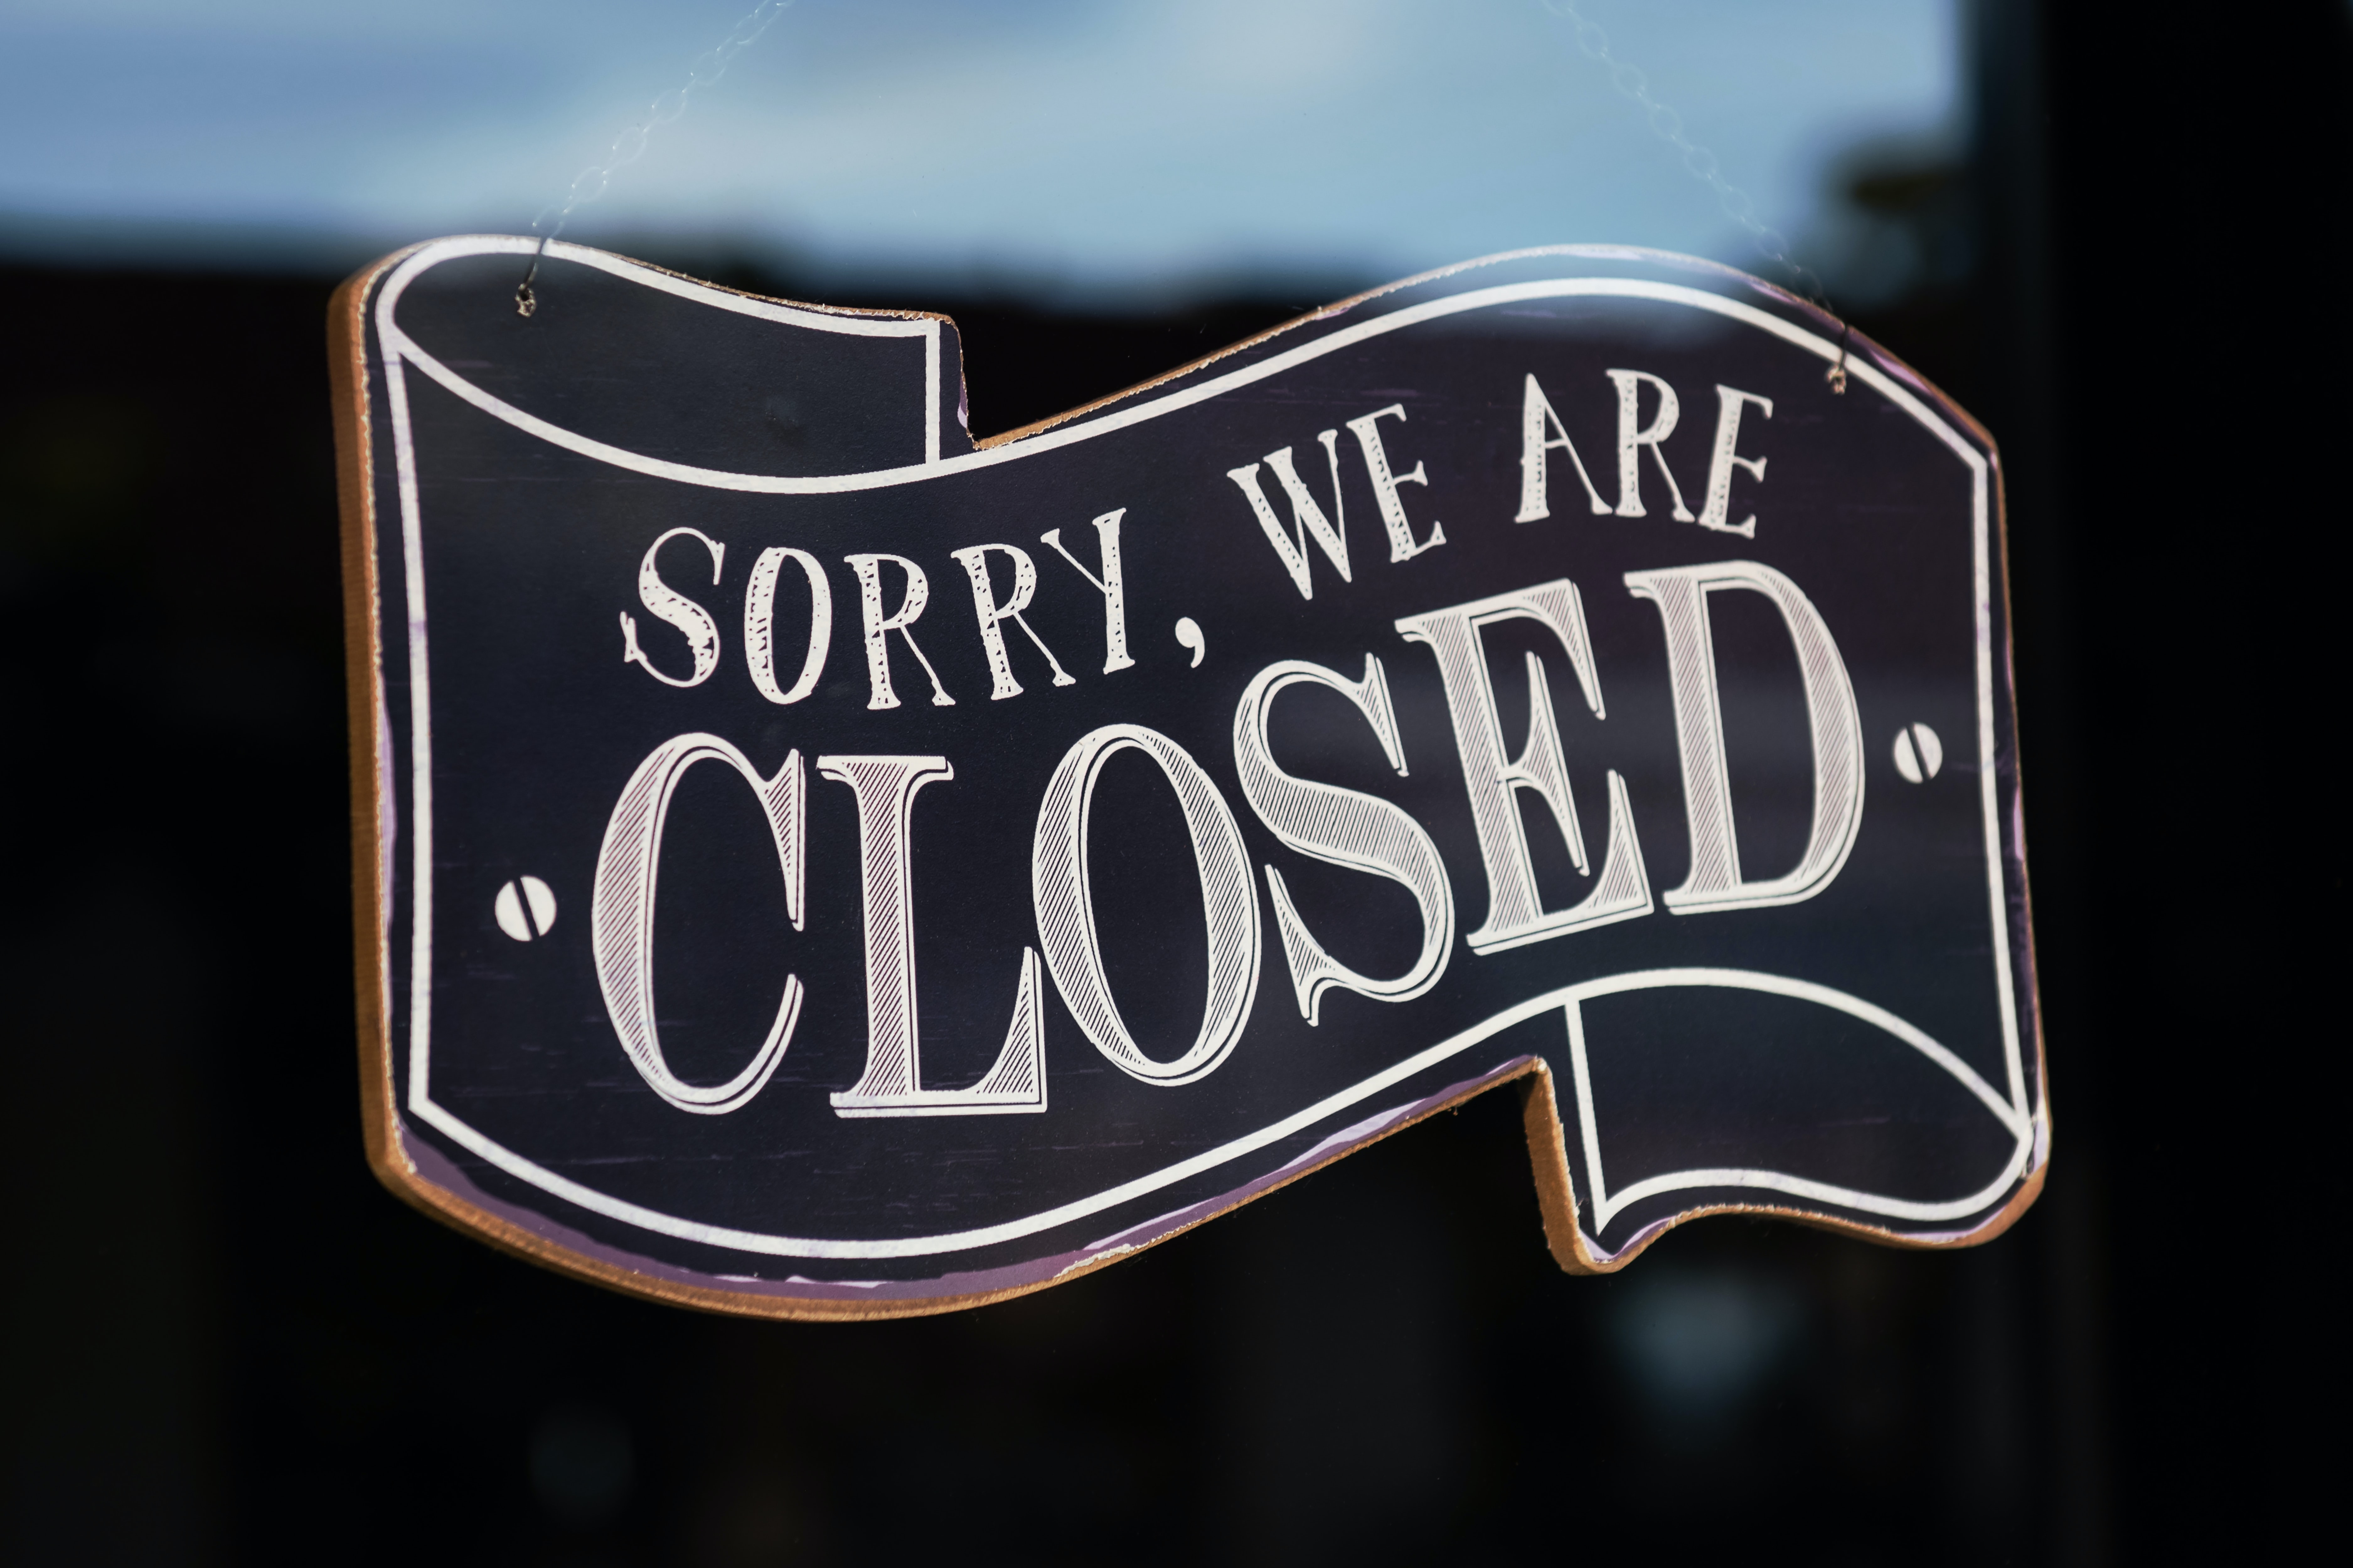 Know of Any CNY Restaurant Closures? Let Us Know!